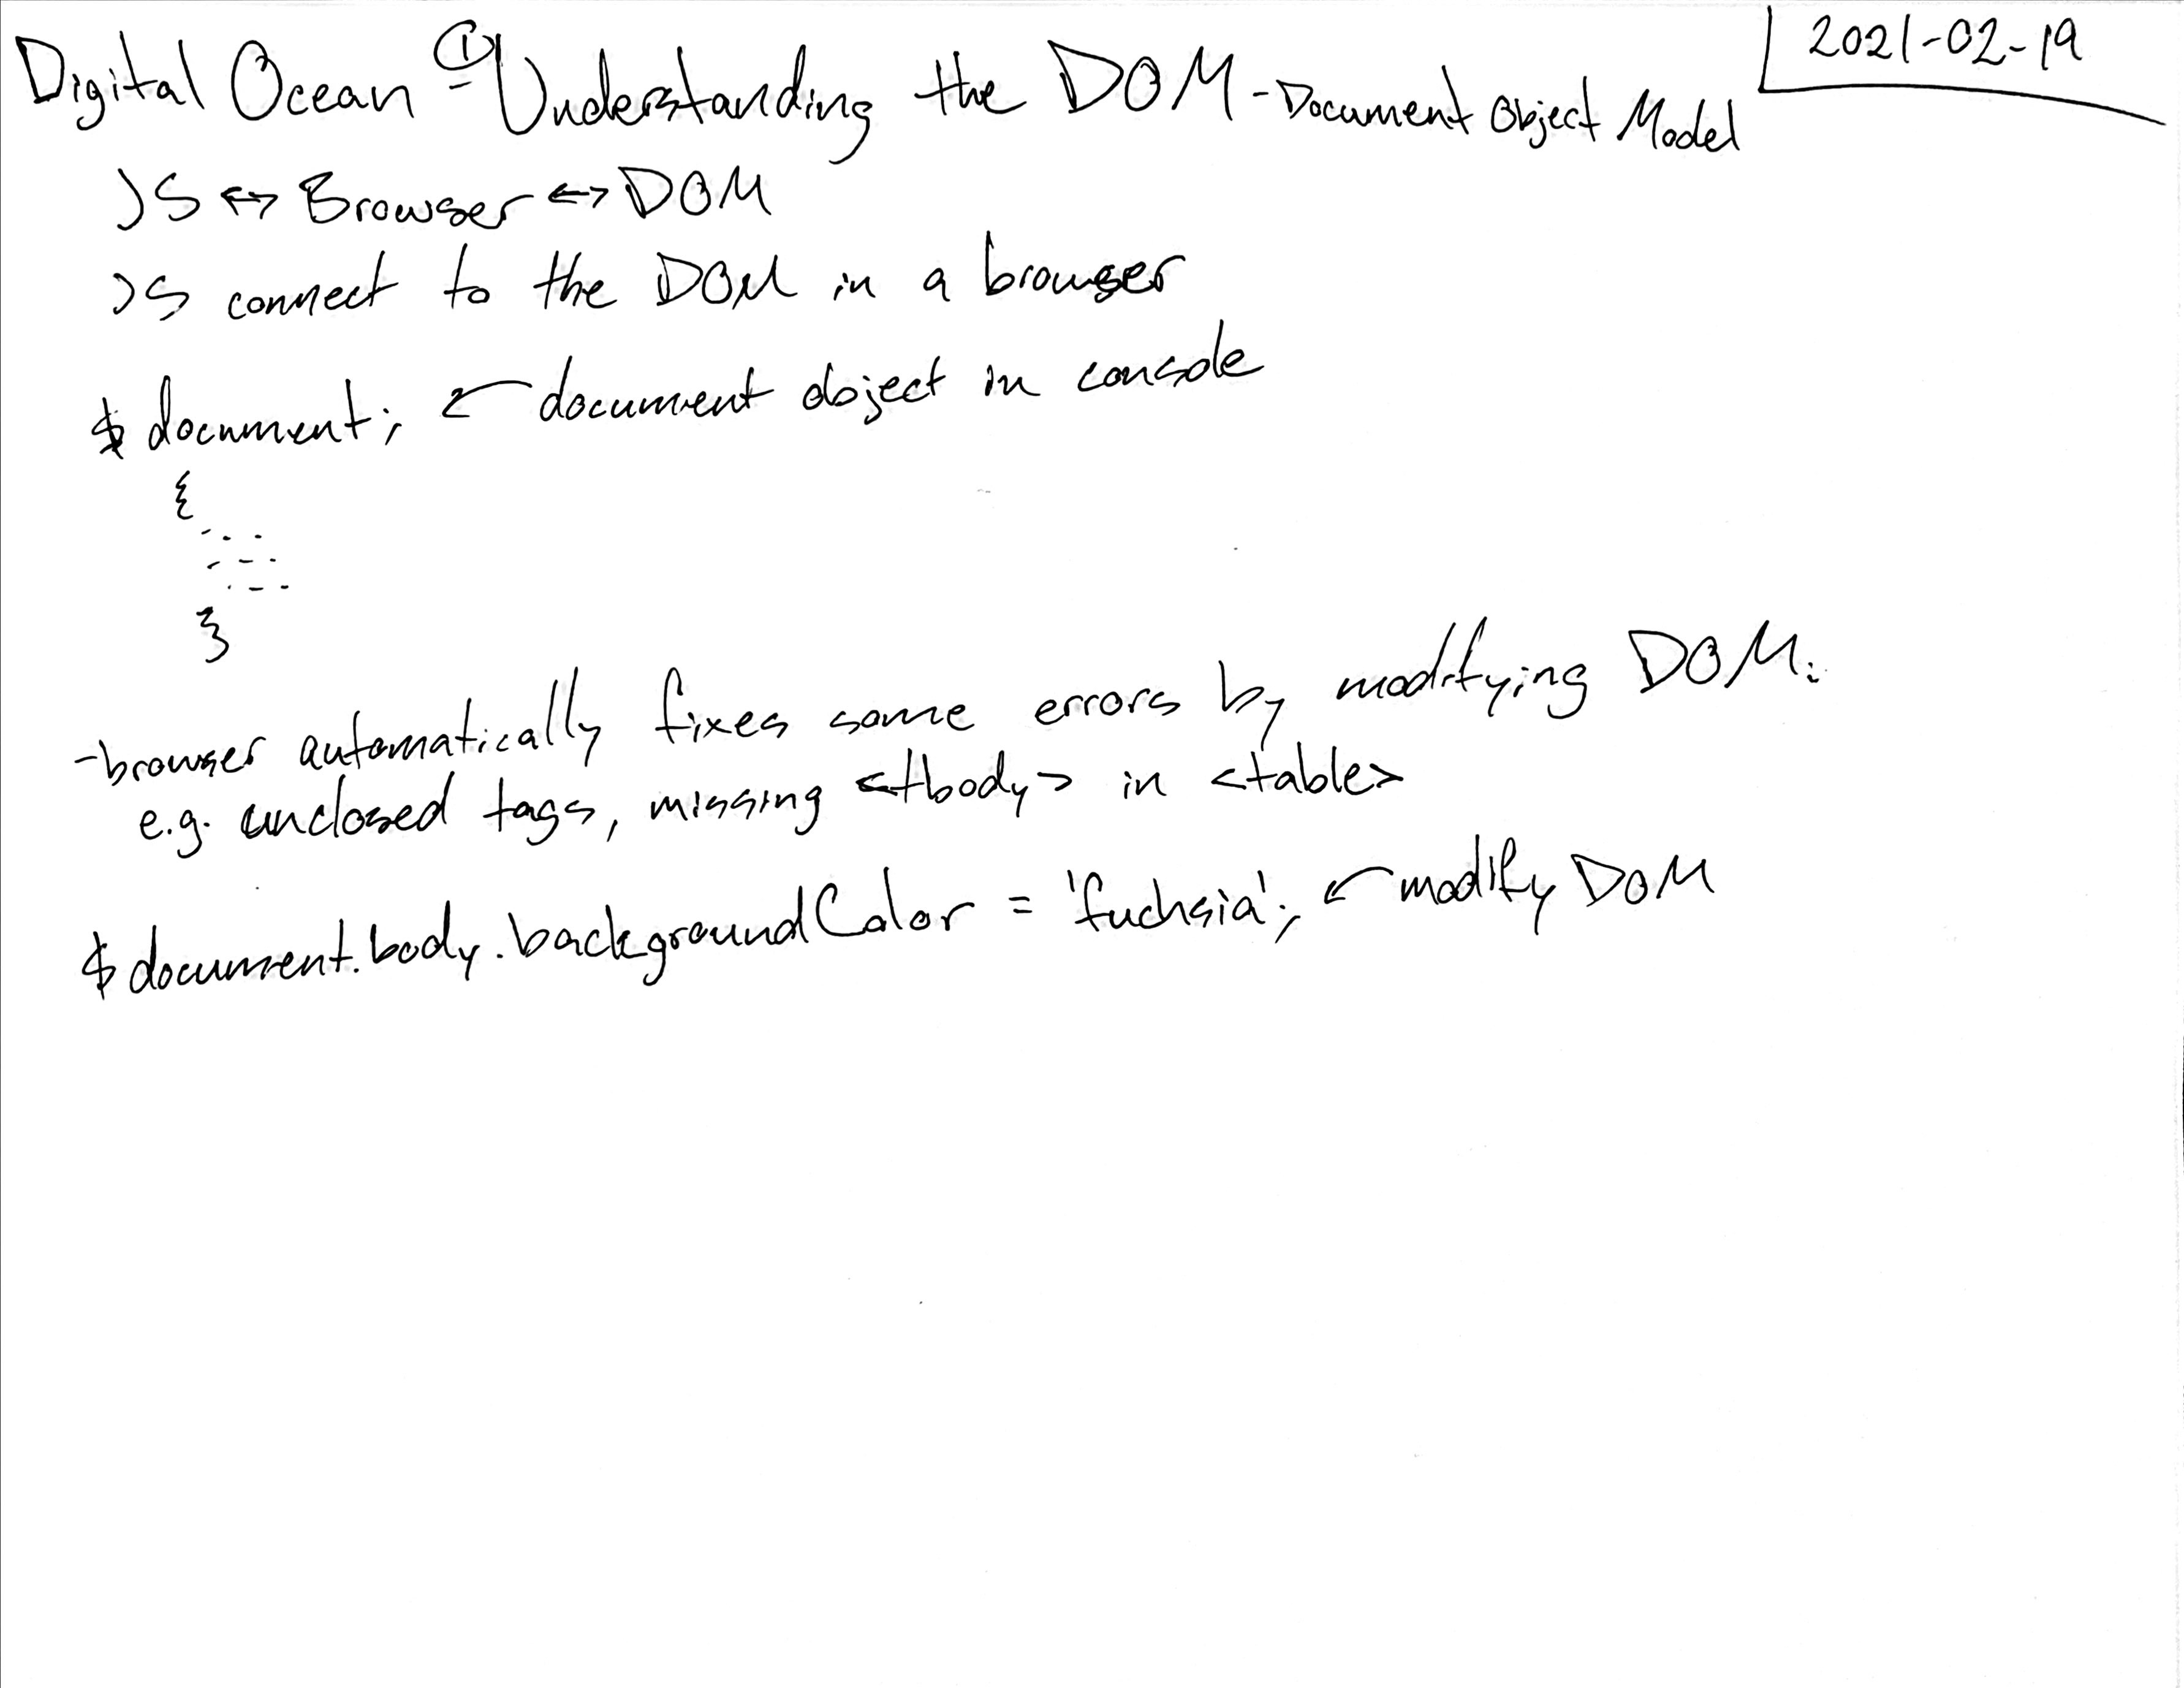 1 intro to dom notes